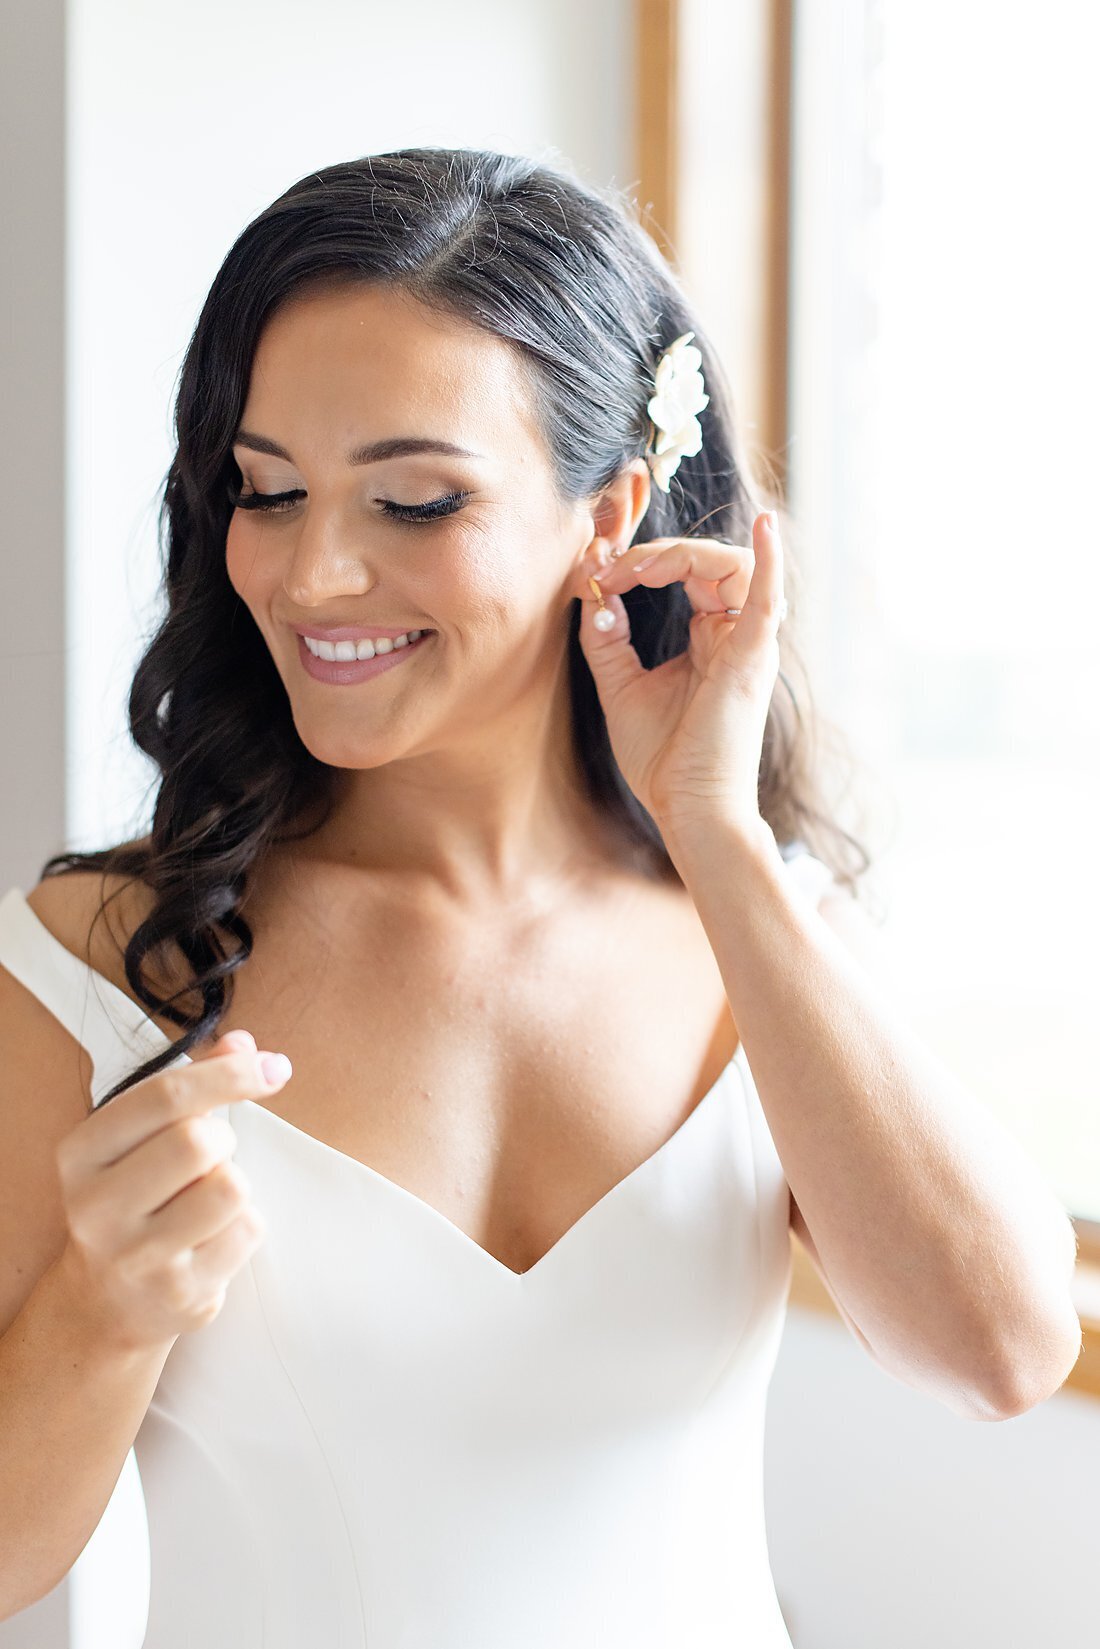 Beautiful-bride-puts-on-earings-while-she-gets-ready-to-go-see-her-groom-on-their-wedding-day